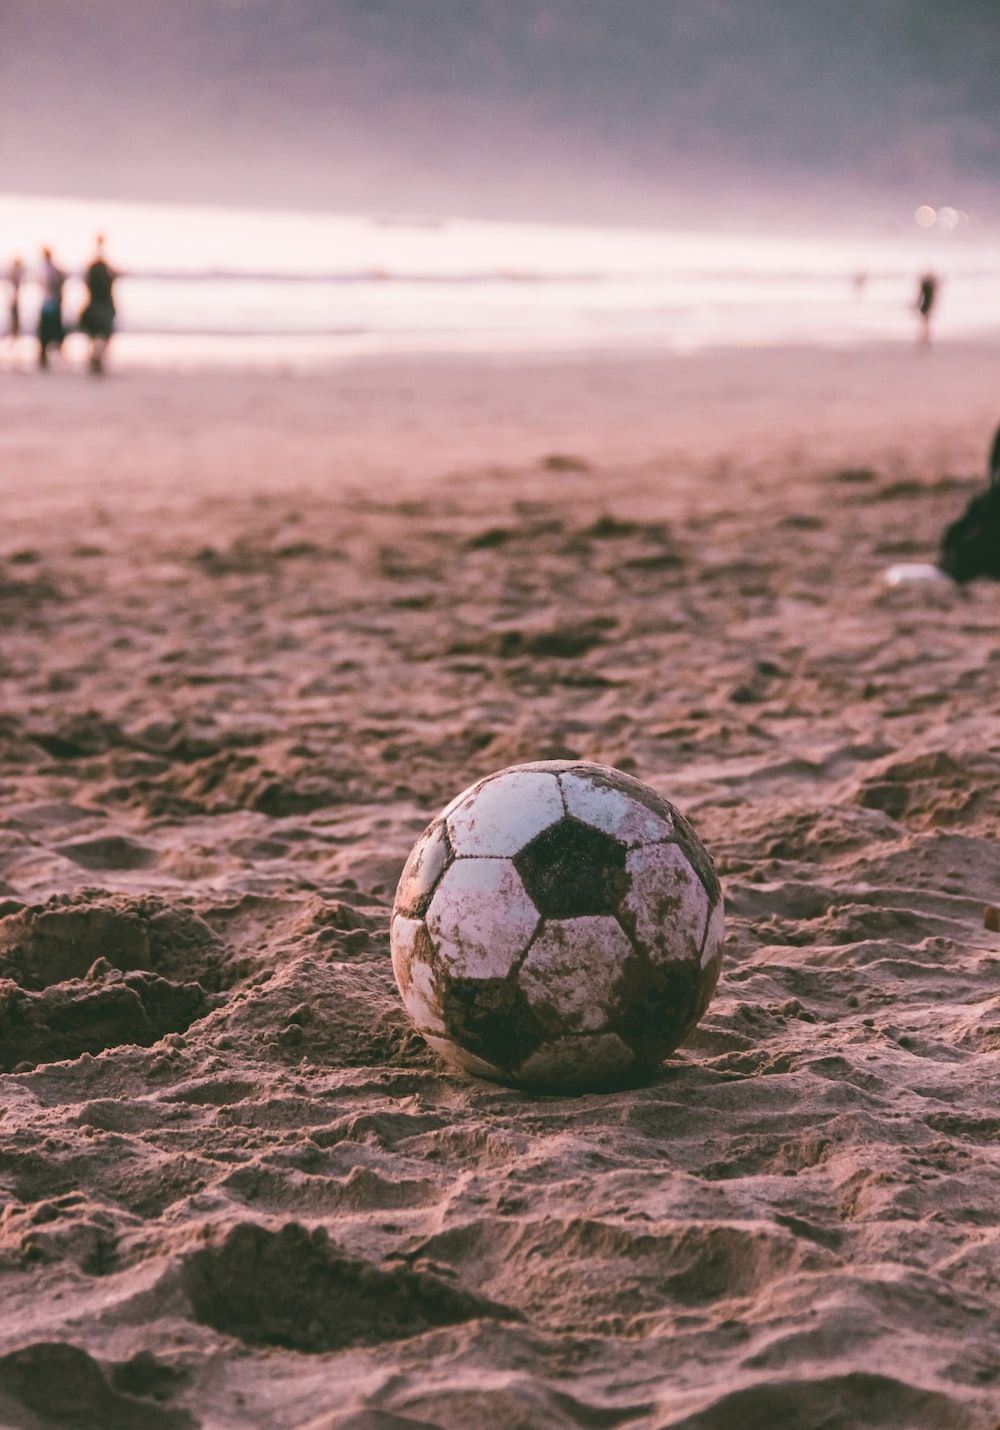 Beach Football Picture. Download Free Image